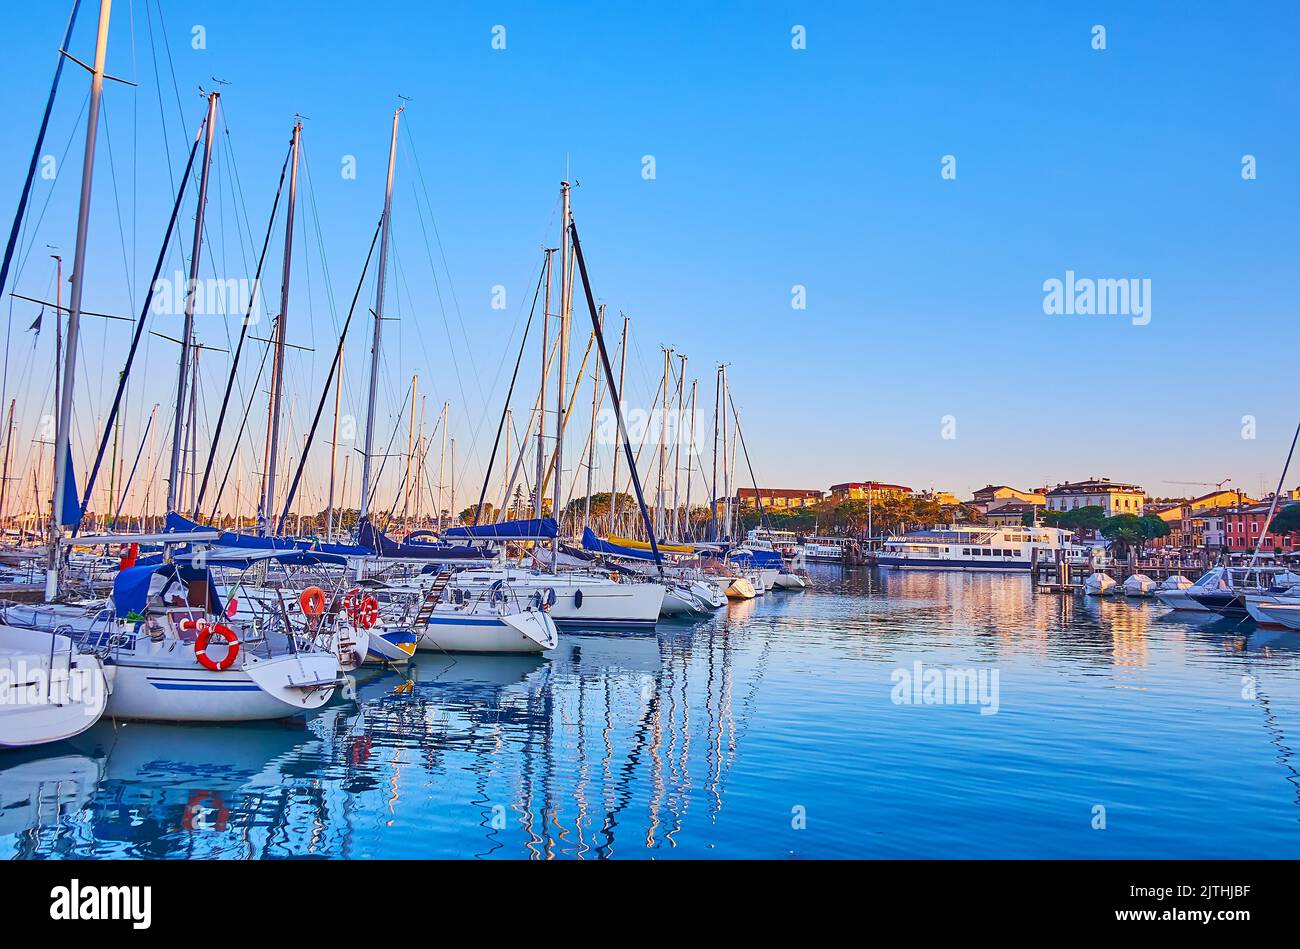 Lake Garda azure surface with moored sail yachts and houses in background at sunset, Desenzano del Garda, Italy Stock Photo